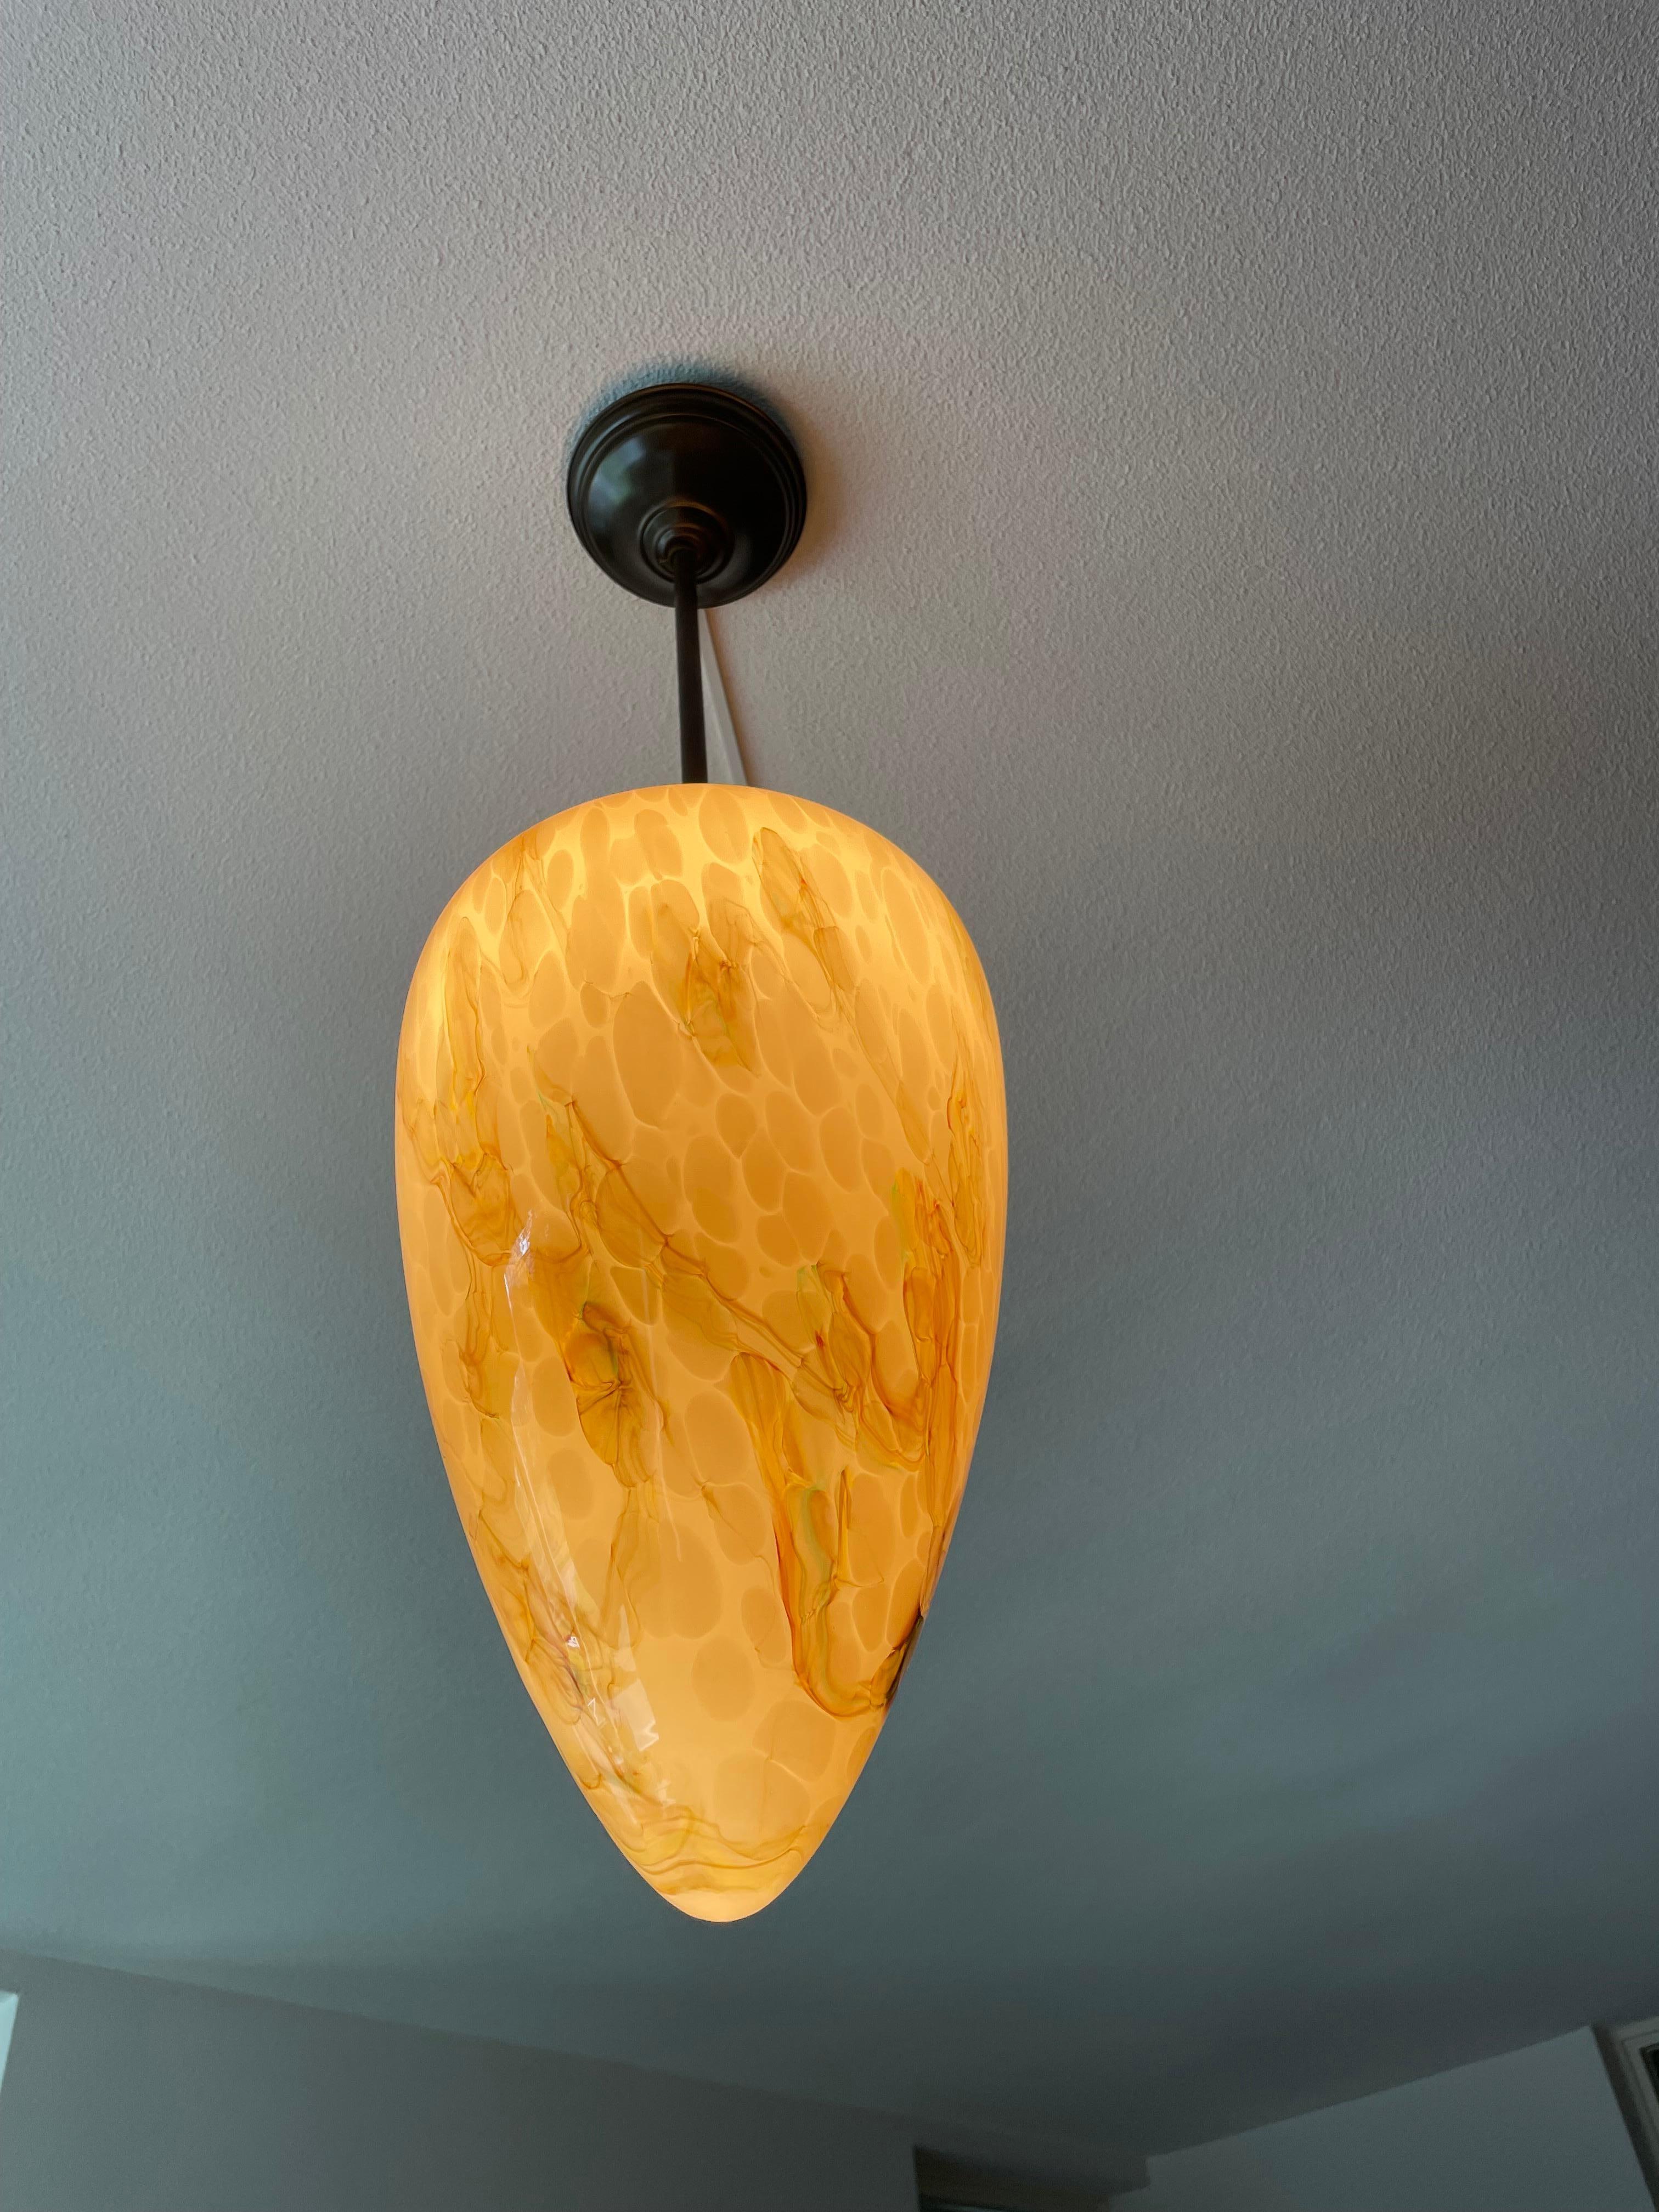 Large Size & Great Cone Shape Midcentury Made Art Deco Style Glass Pendant Light For Sale 6